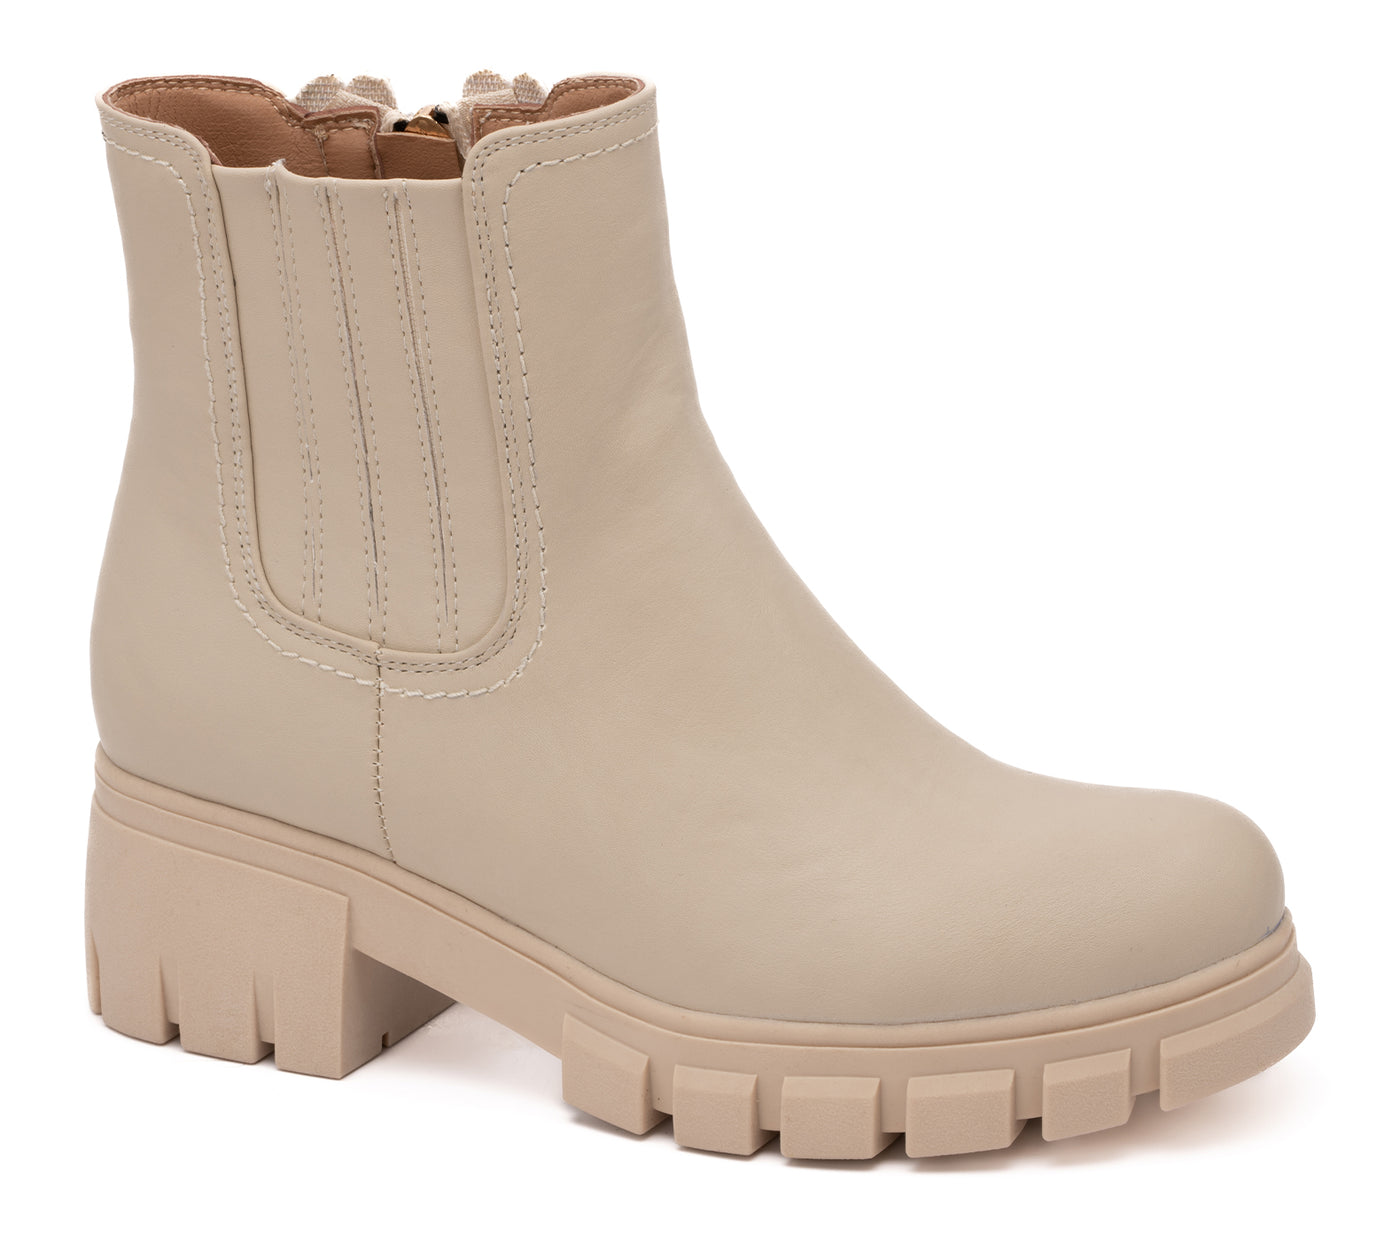 Corkys "As If" Boot in Ivory Final Sale